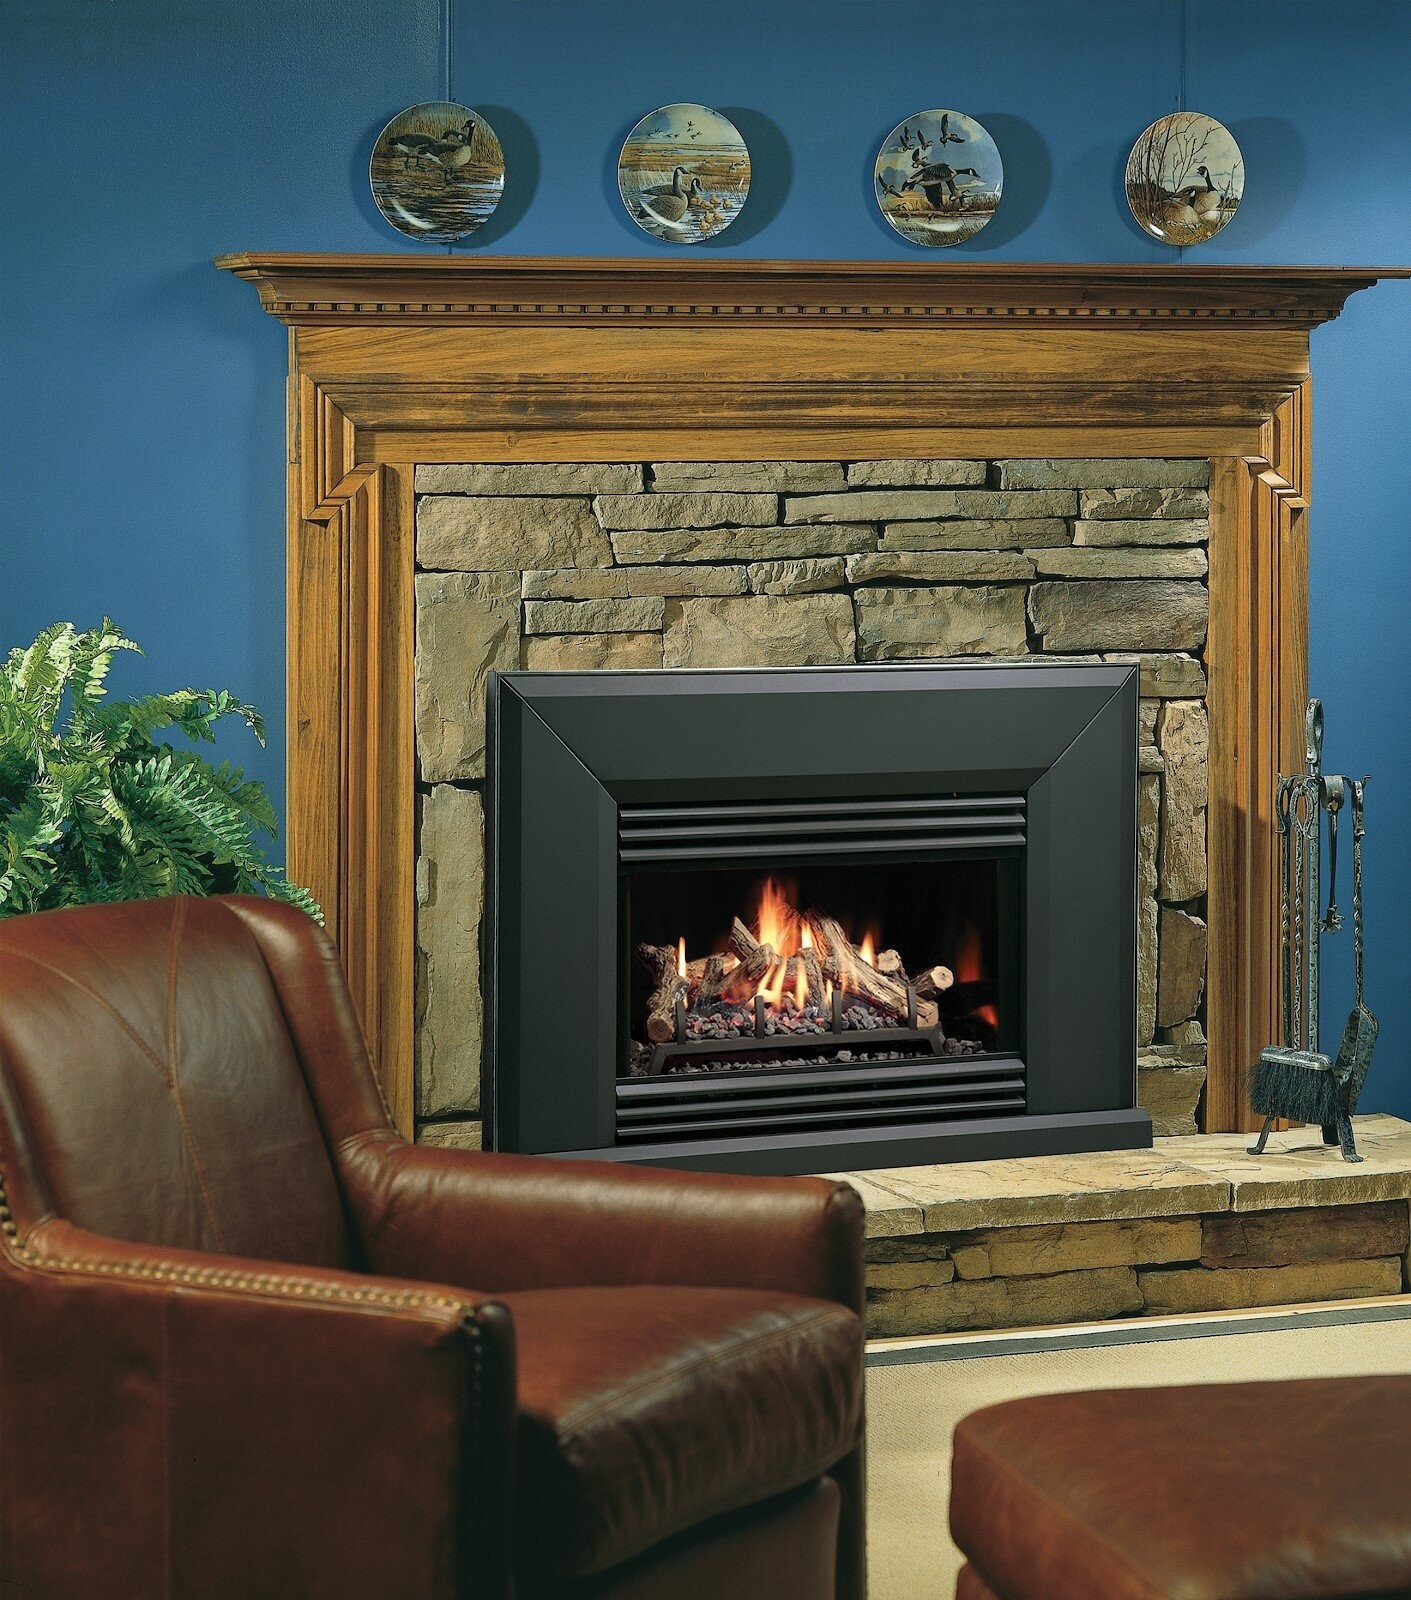 Fireplace Insert Cleaning Tips and Tricks